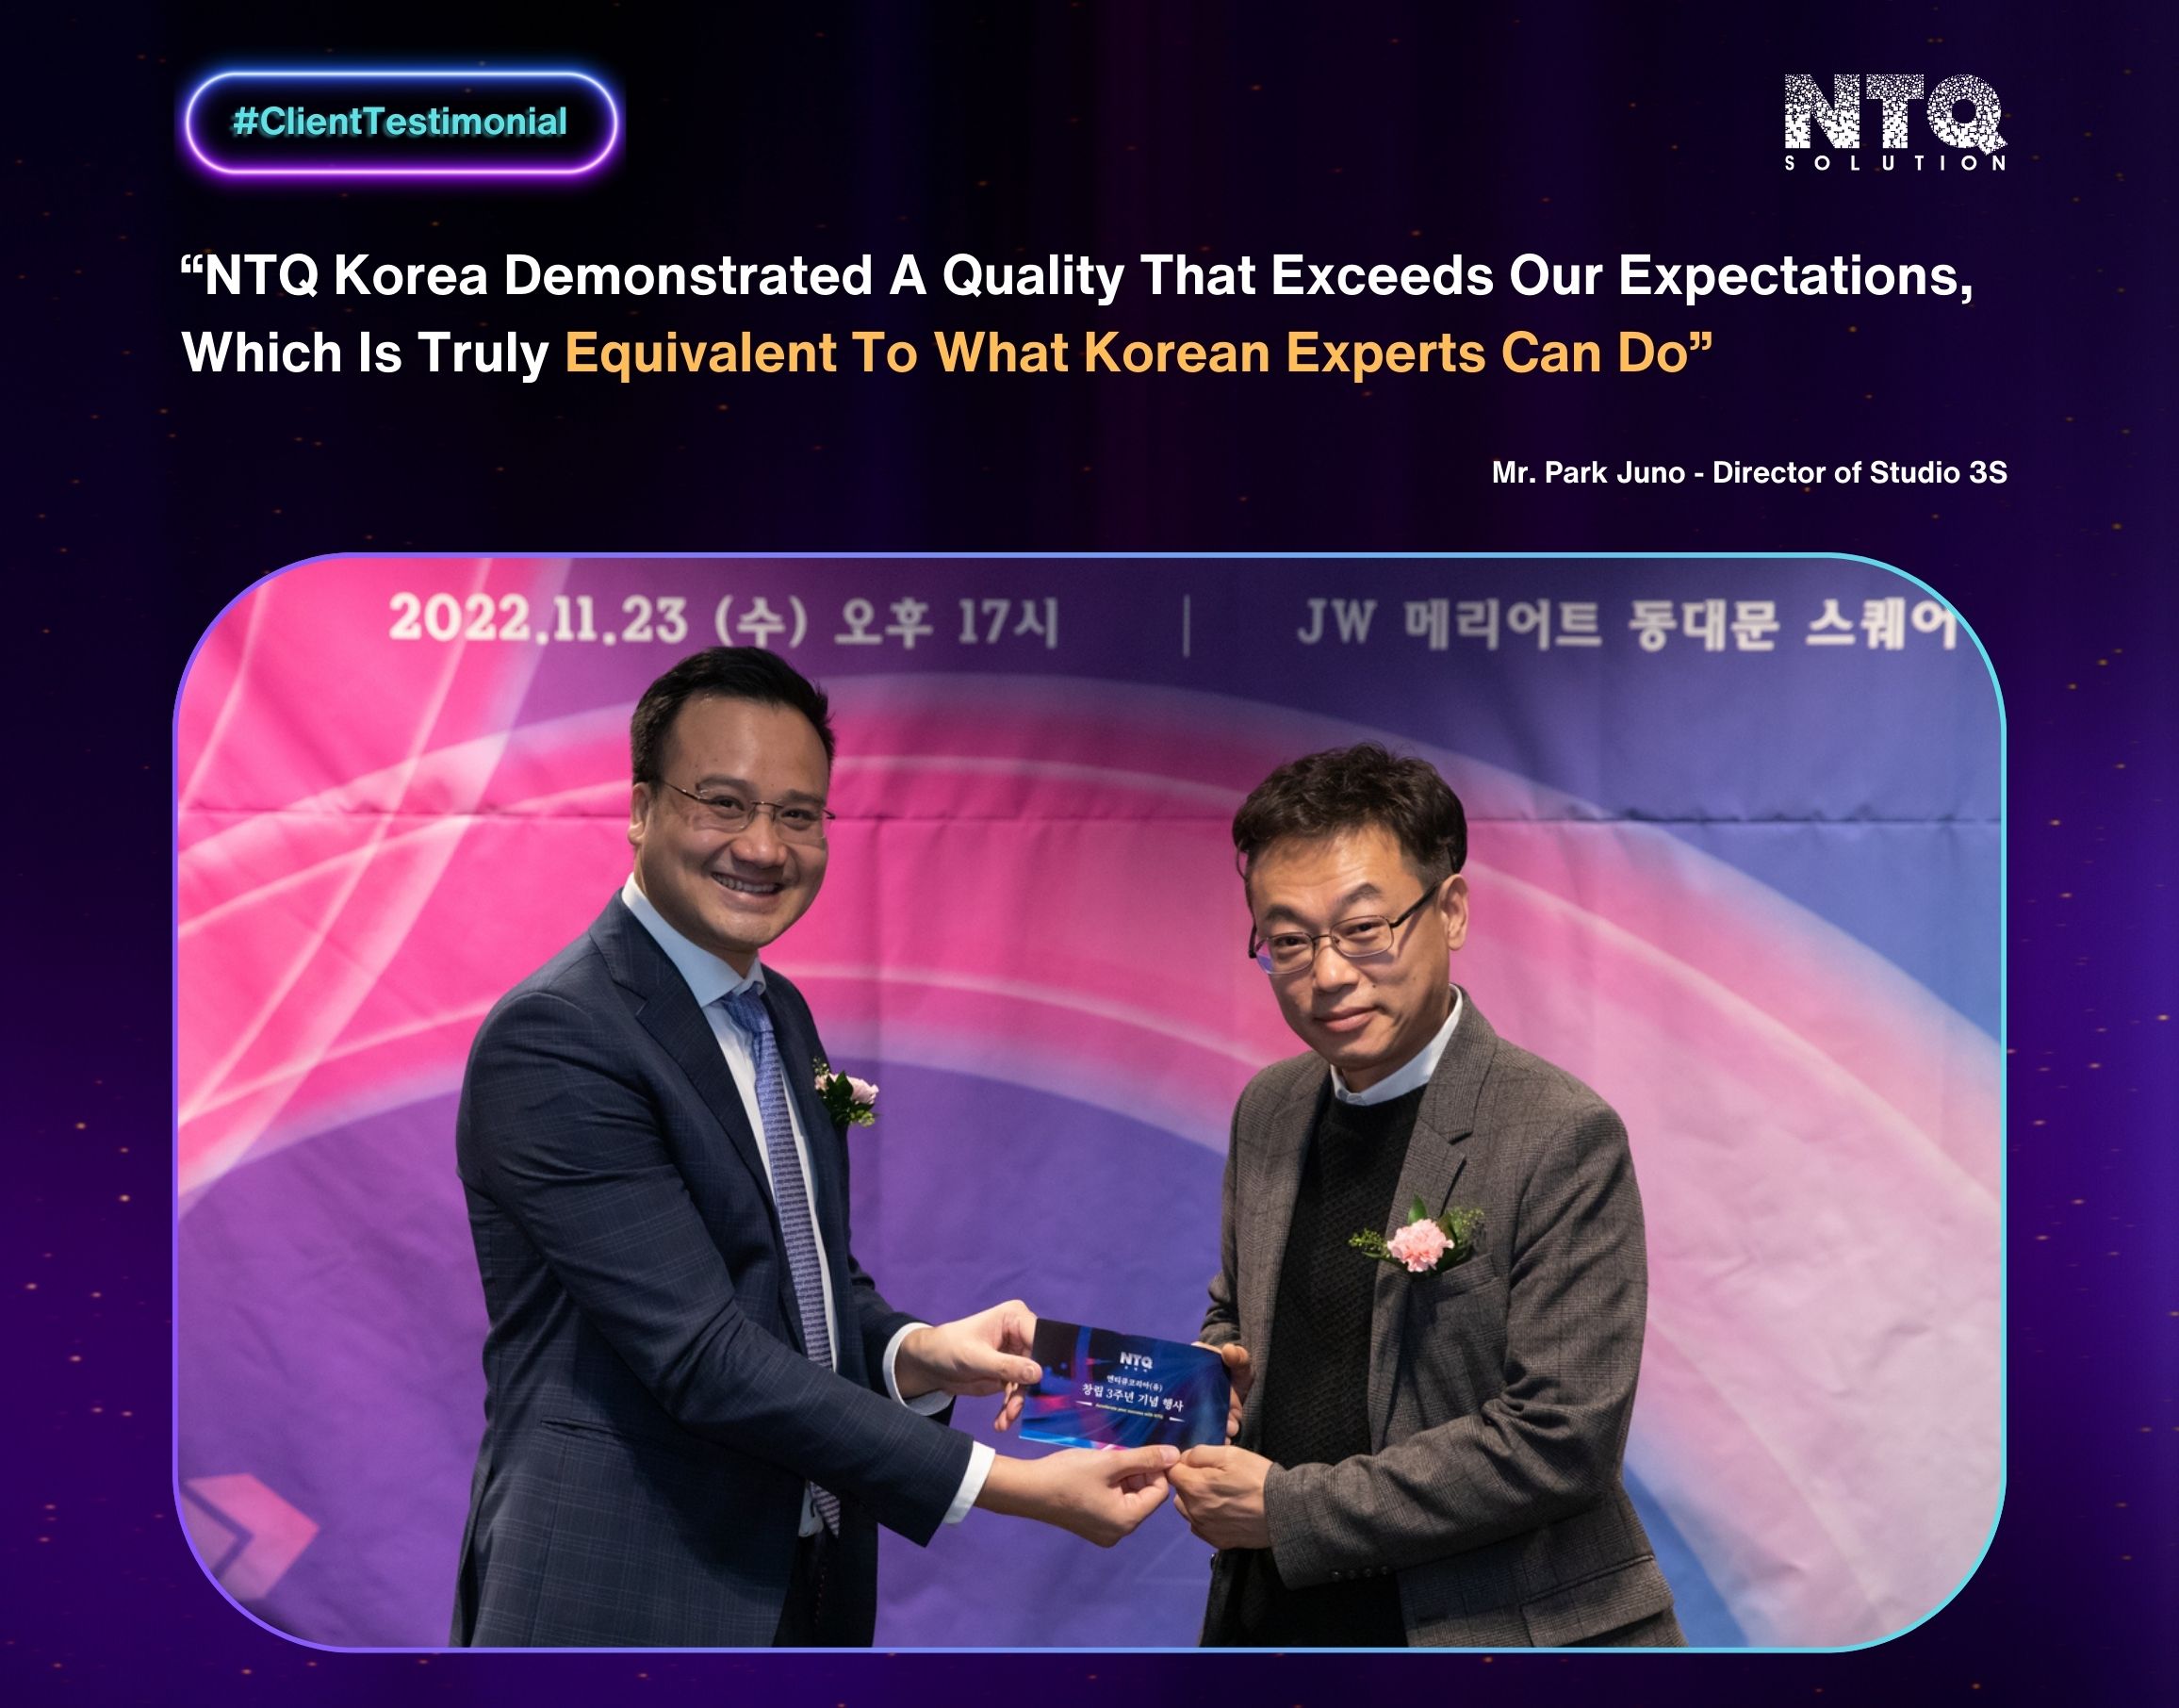 Studio 3S: “NTQ Korea’s Capabilities Are Truly Equivalent To What Korean Experts Can Do”